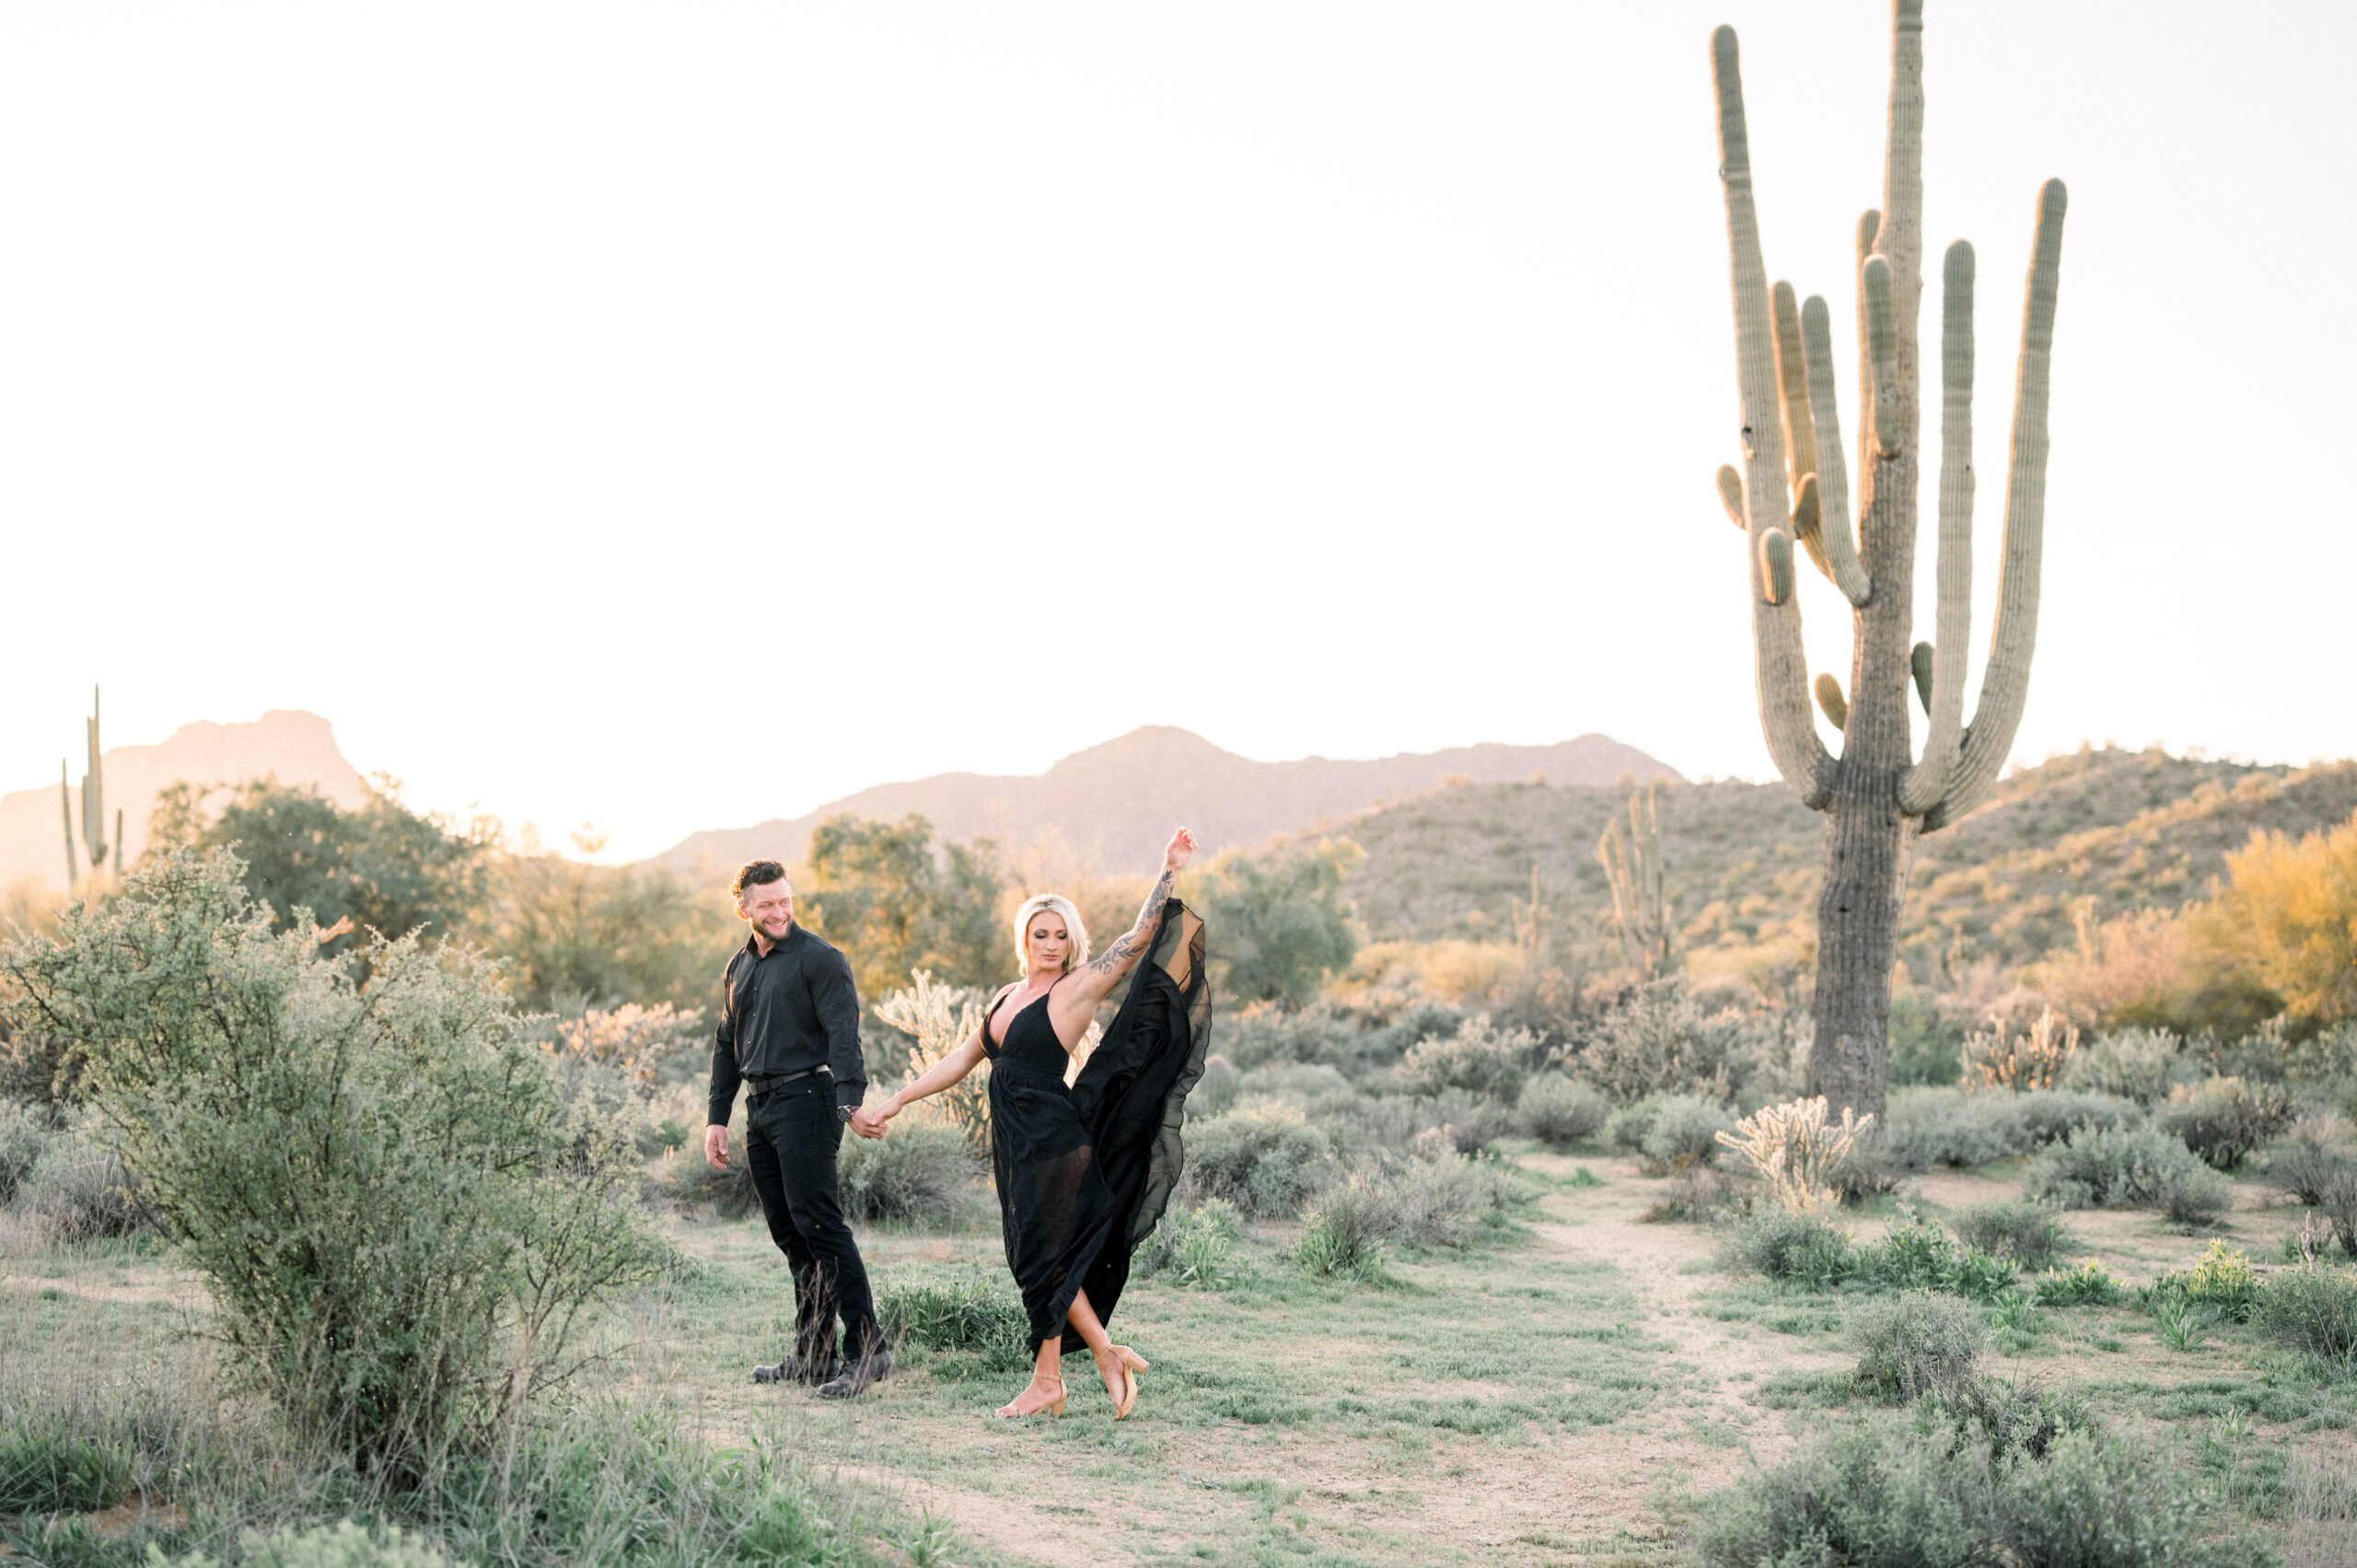 Tatum and Drakes desert engagement session at the Salt River was such an amazing evening. The sunset we had at their session was stunning!